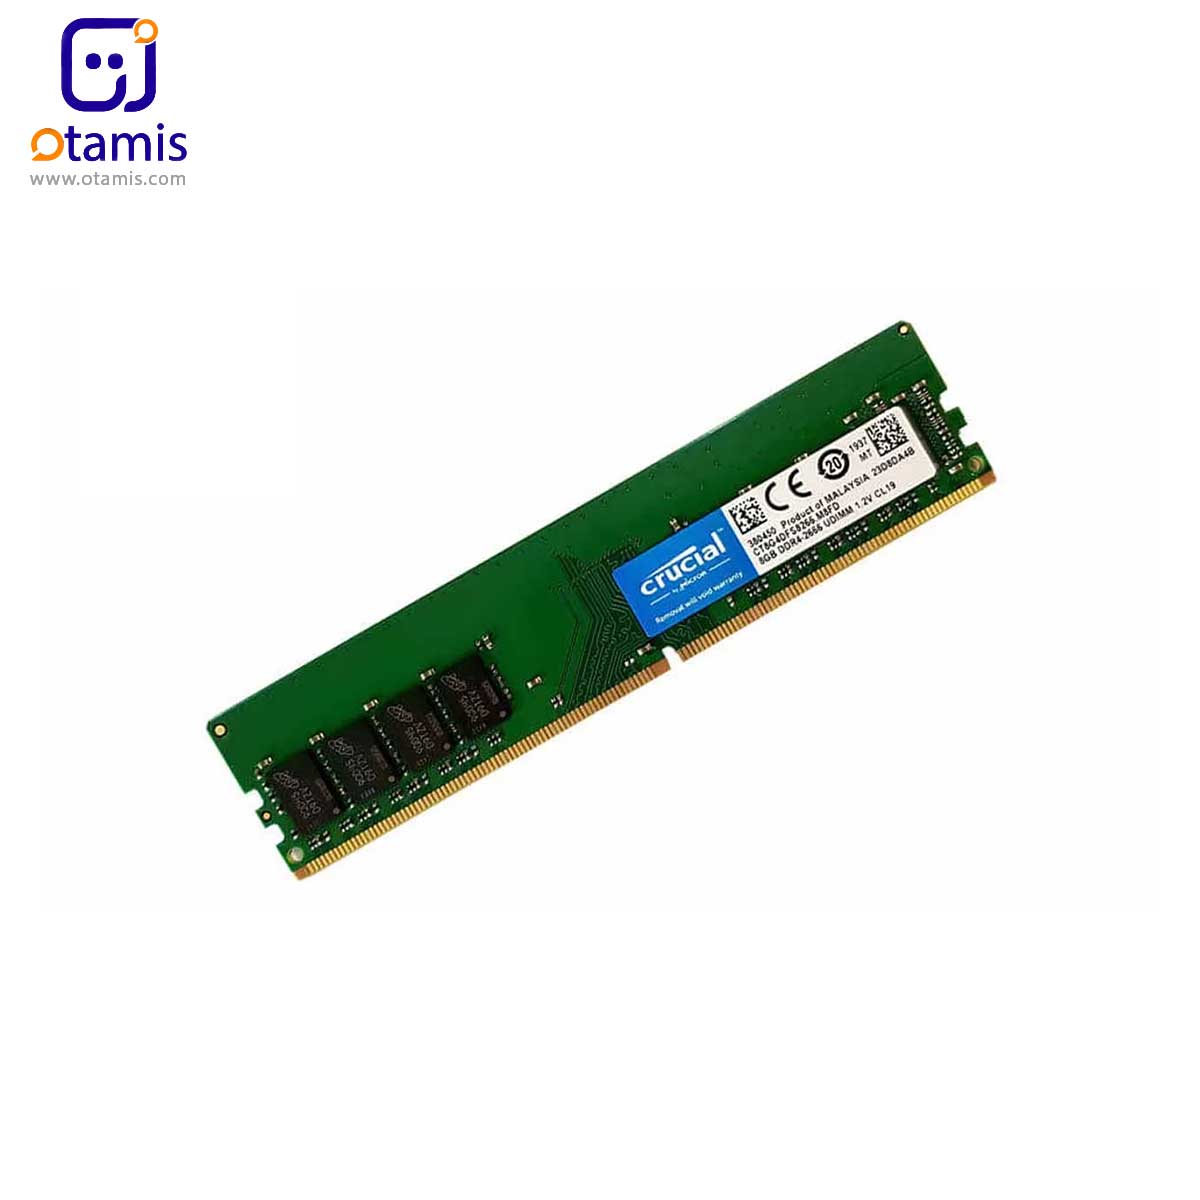 Crucial DDR4 2666MHz CL19 Single Channel computer RAM 8GB